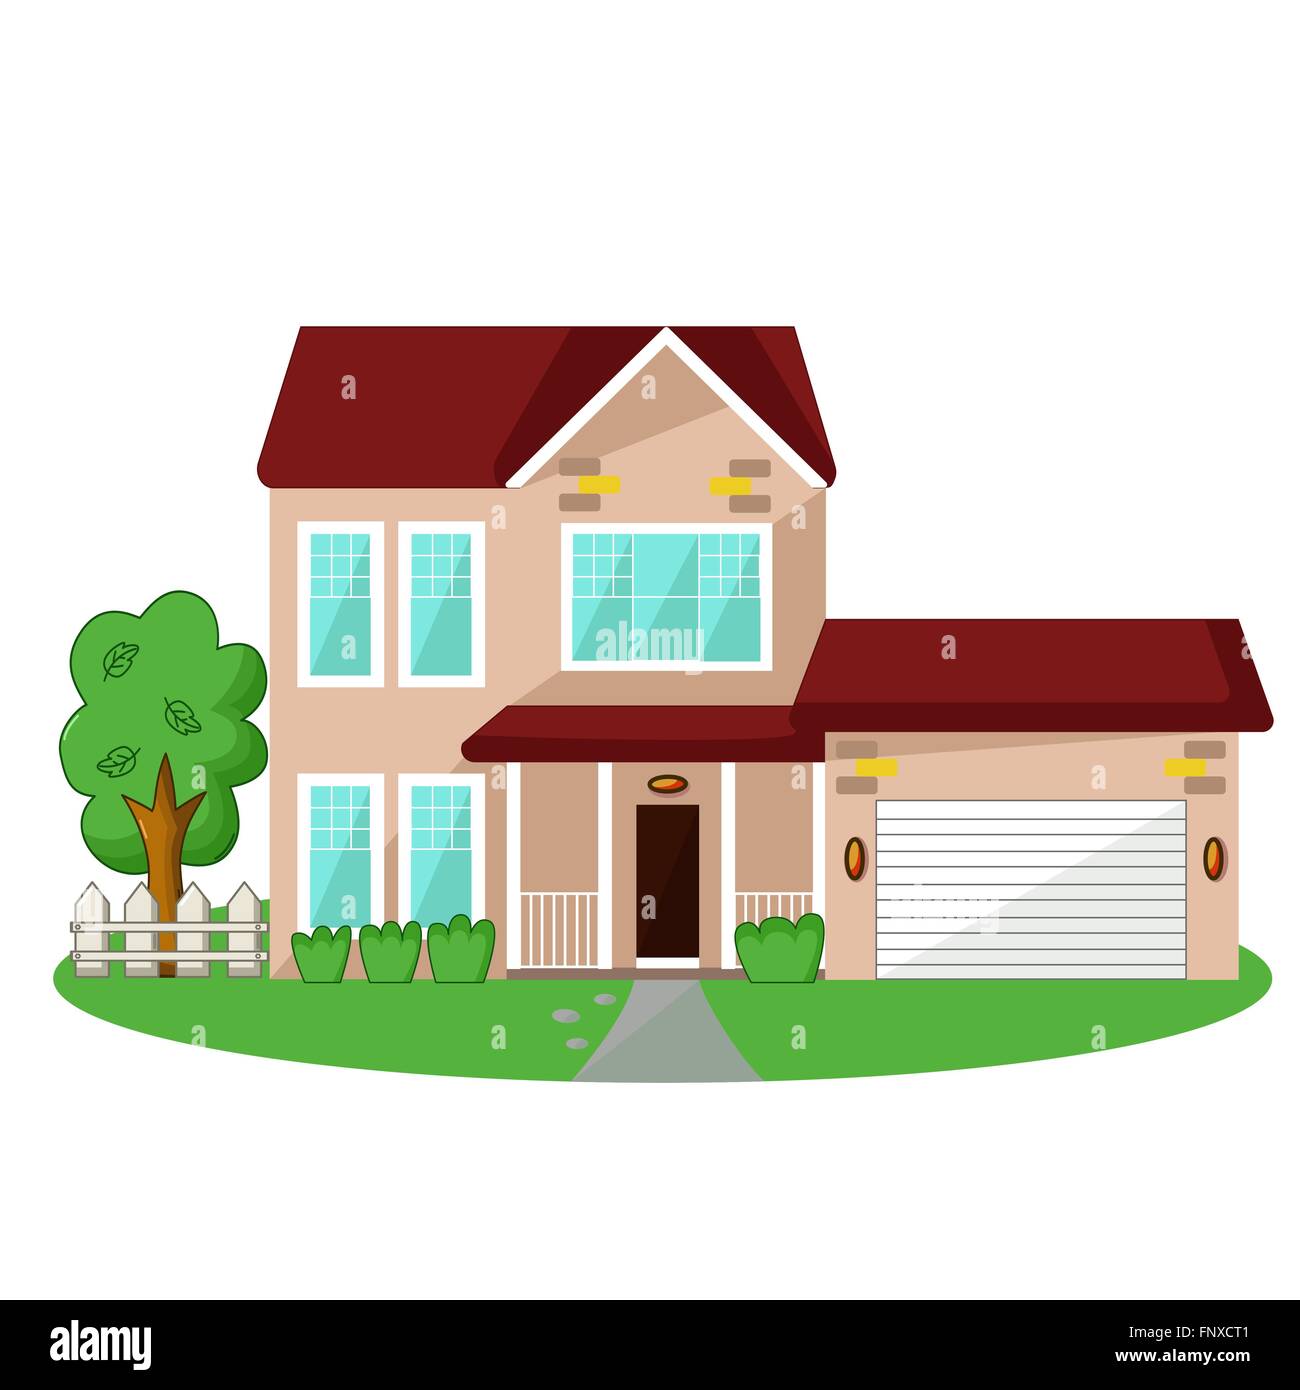 Isolated icon of house with garage and garden on white background Stock Vector